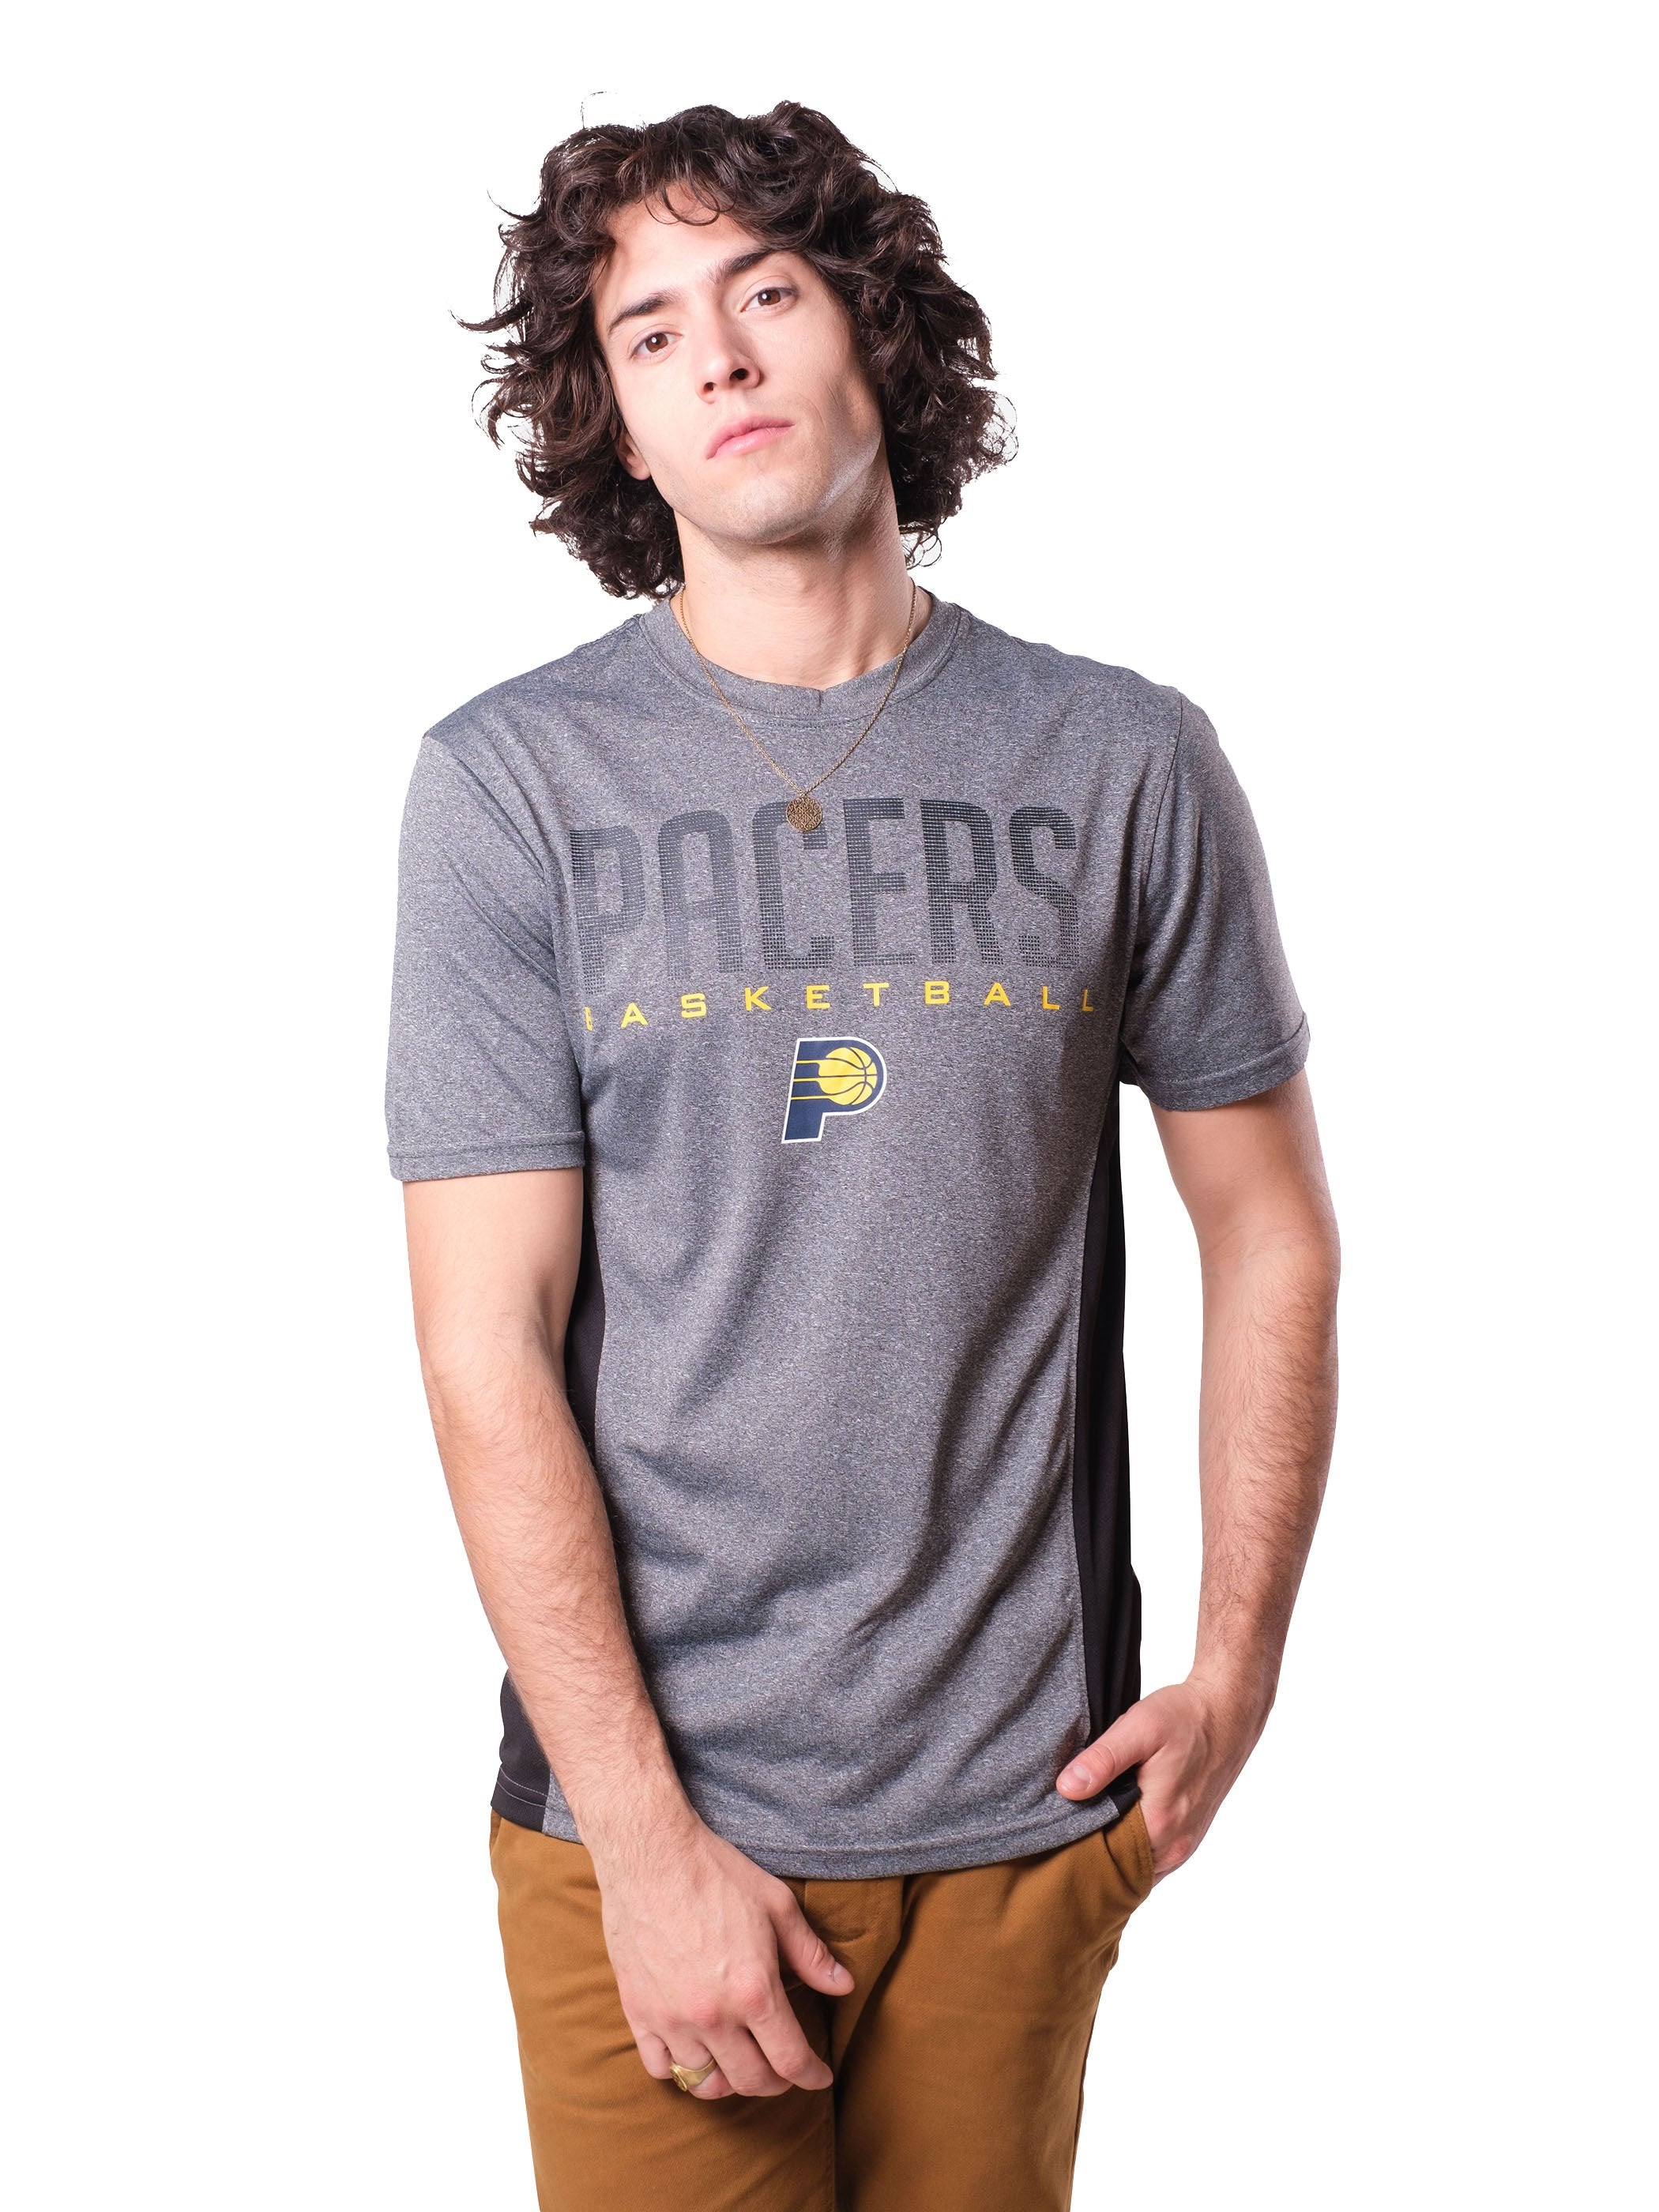 NBA Indiana Pacers Men's Short Sleeve Tee|Indiana Pacers